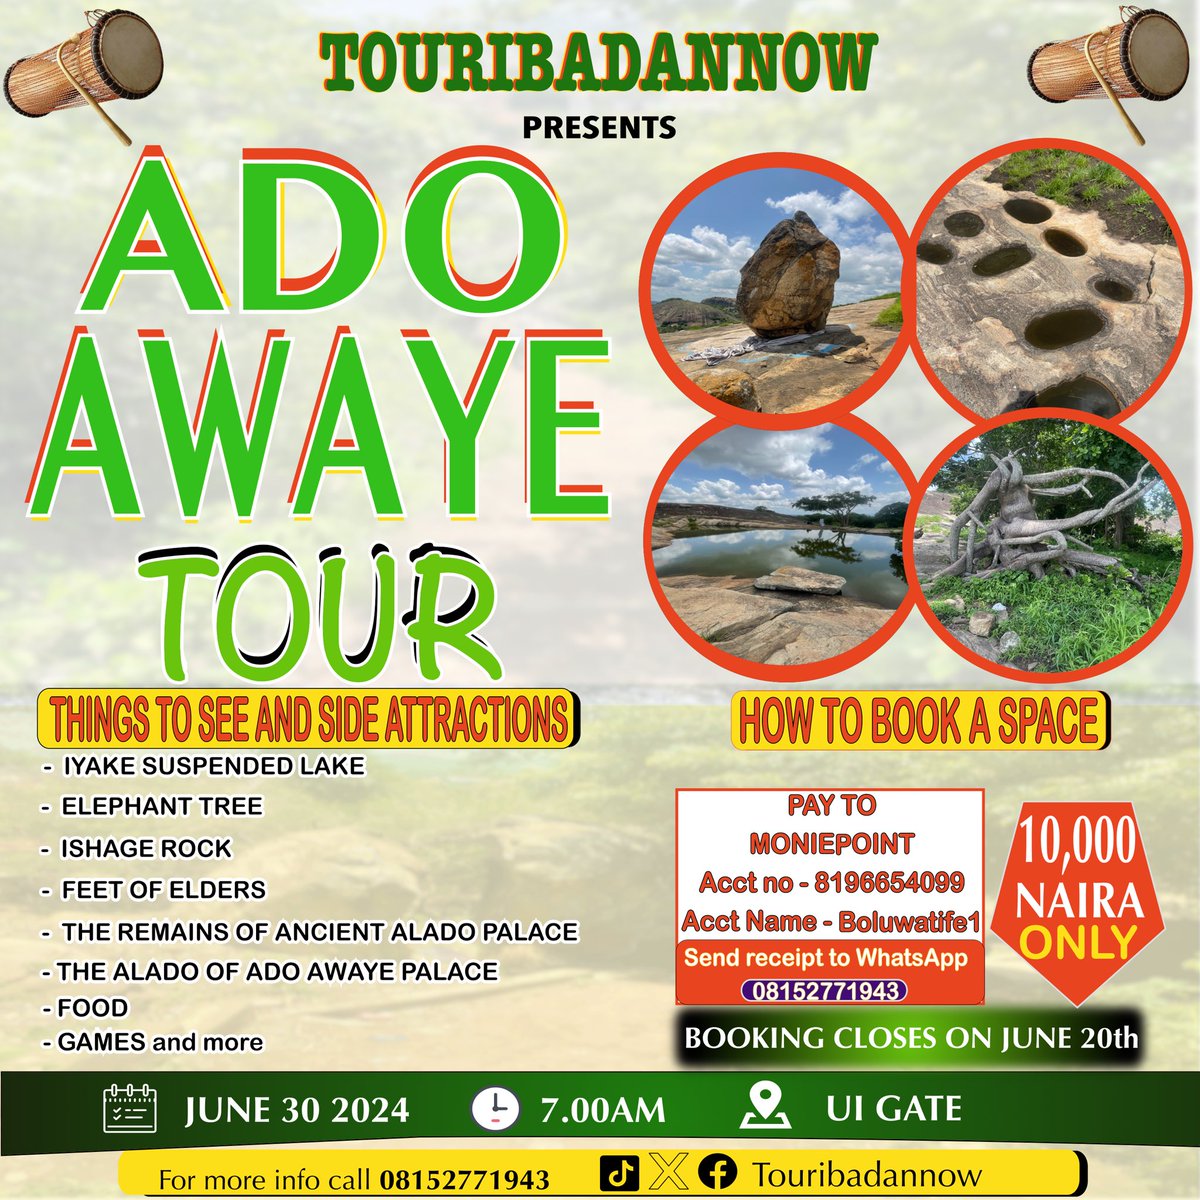 Mention 10 fun places in Ibadan and win 1k airtime. Also use the hashtag #TourAdoAwayeJune30 in your answers. Let’s go. 

@touribadannow will select winners randomly